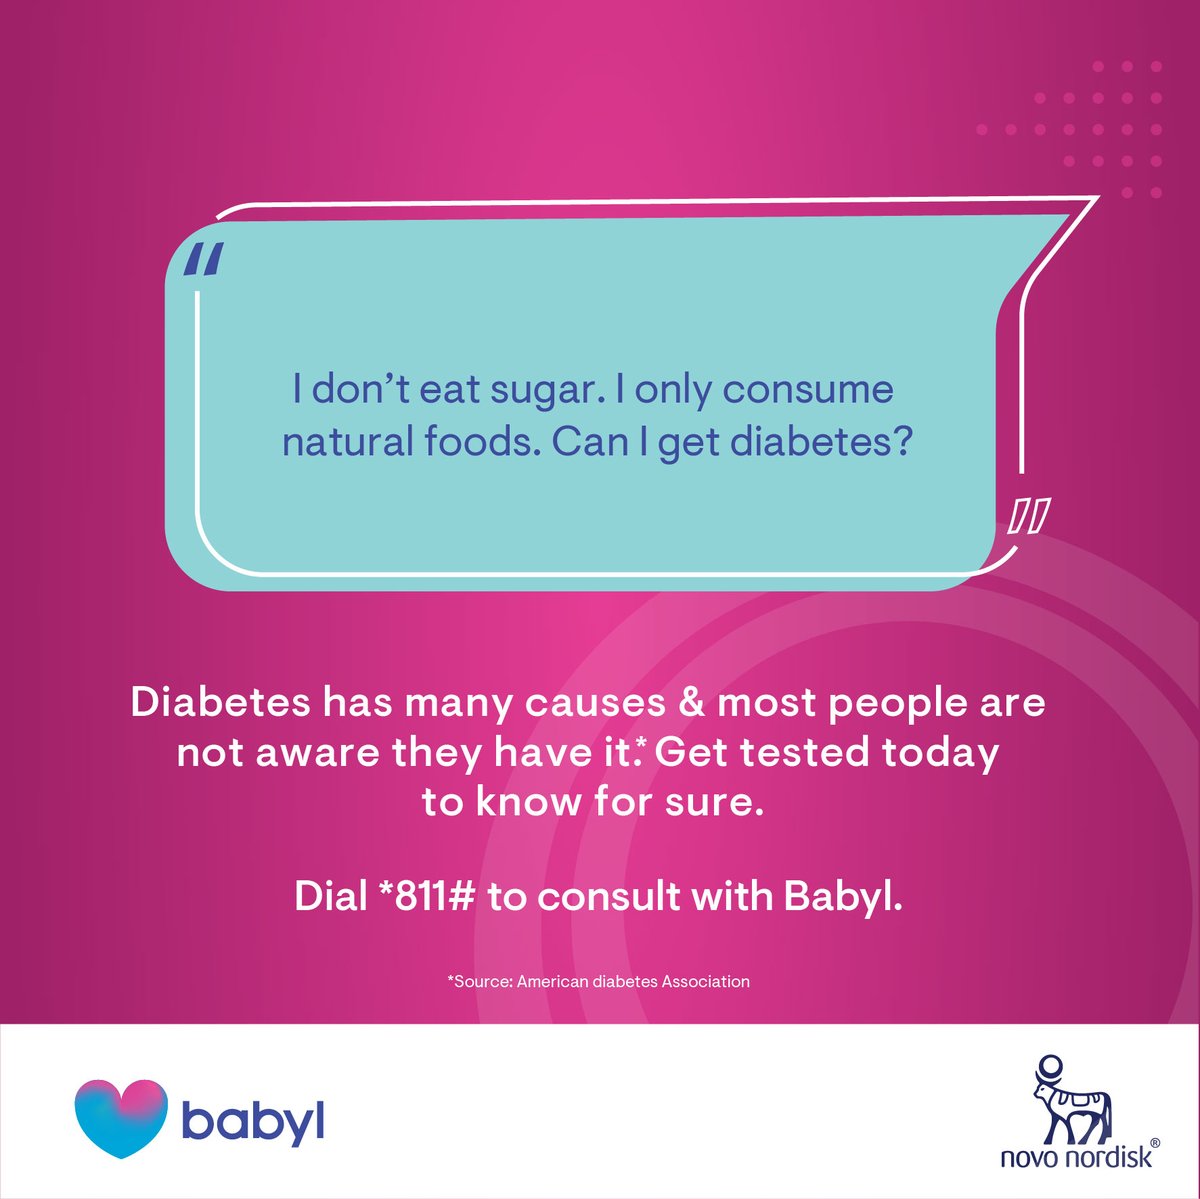 Most people think that eating lots of sugar causes diabetes. While eating lots of sugar occasionally doesn't directly cause diabetes in a normal-weight, healthy person, too much sugar can certainly be detrimental. Portion control and moderation are key. Learn more about